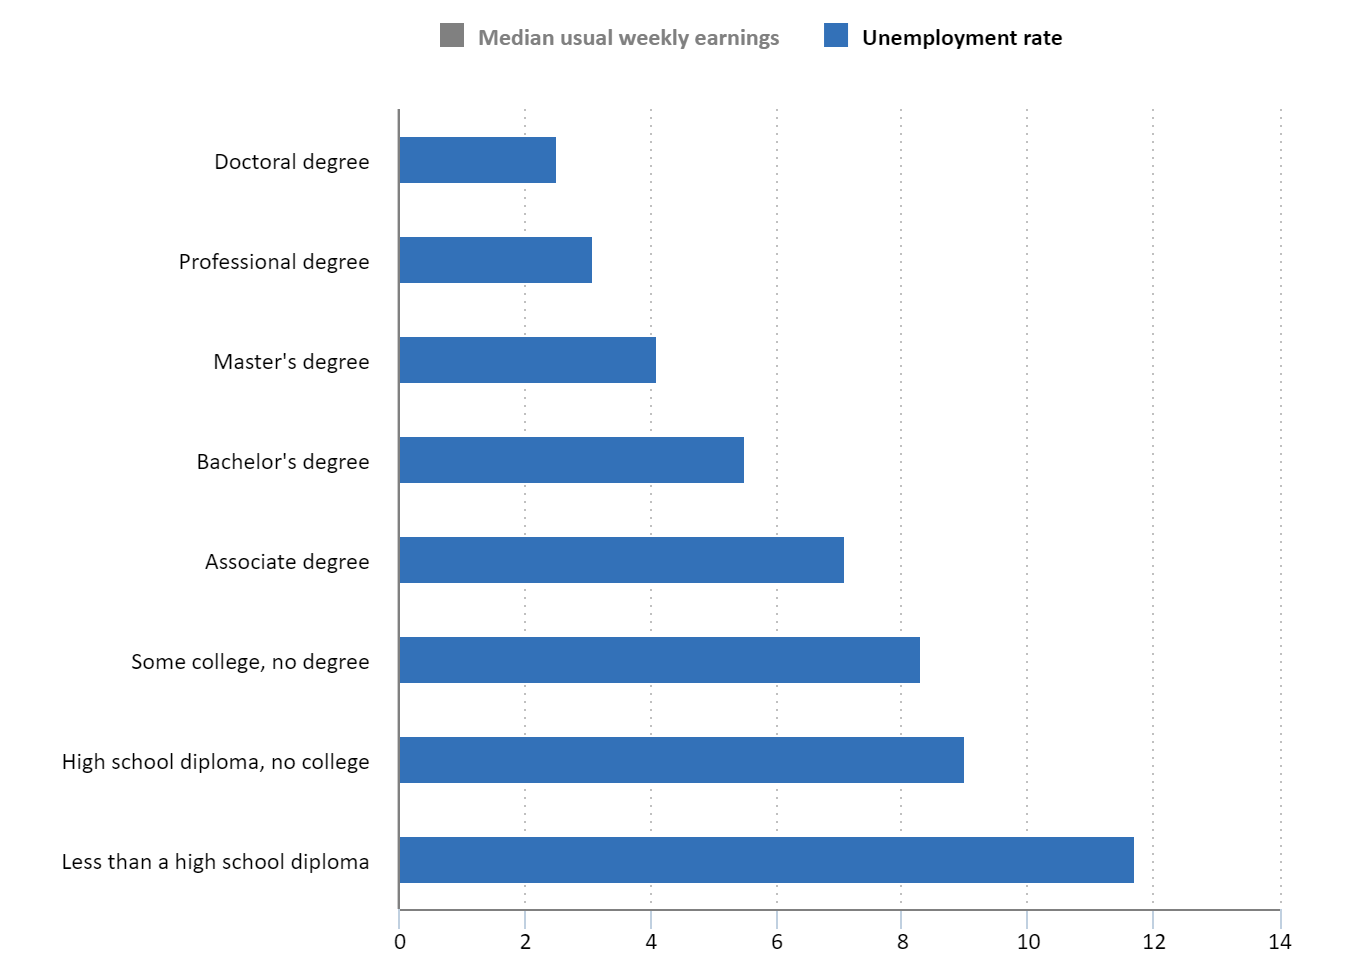 unemployment rate by educational attainment; doctoral degree 2.5%; professional degree 3.1%; master's degree 4.1%; bachelor's degree 5.5%; associate degree 7.1%; some college, no degree 8.3%; high school diploma, no college 9.0%; less than a high school diploma 11.7%;